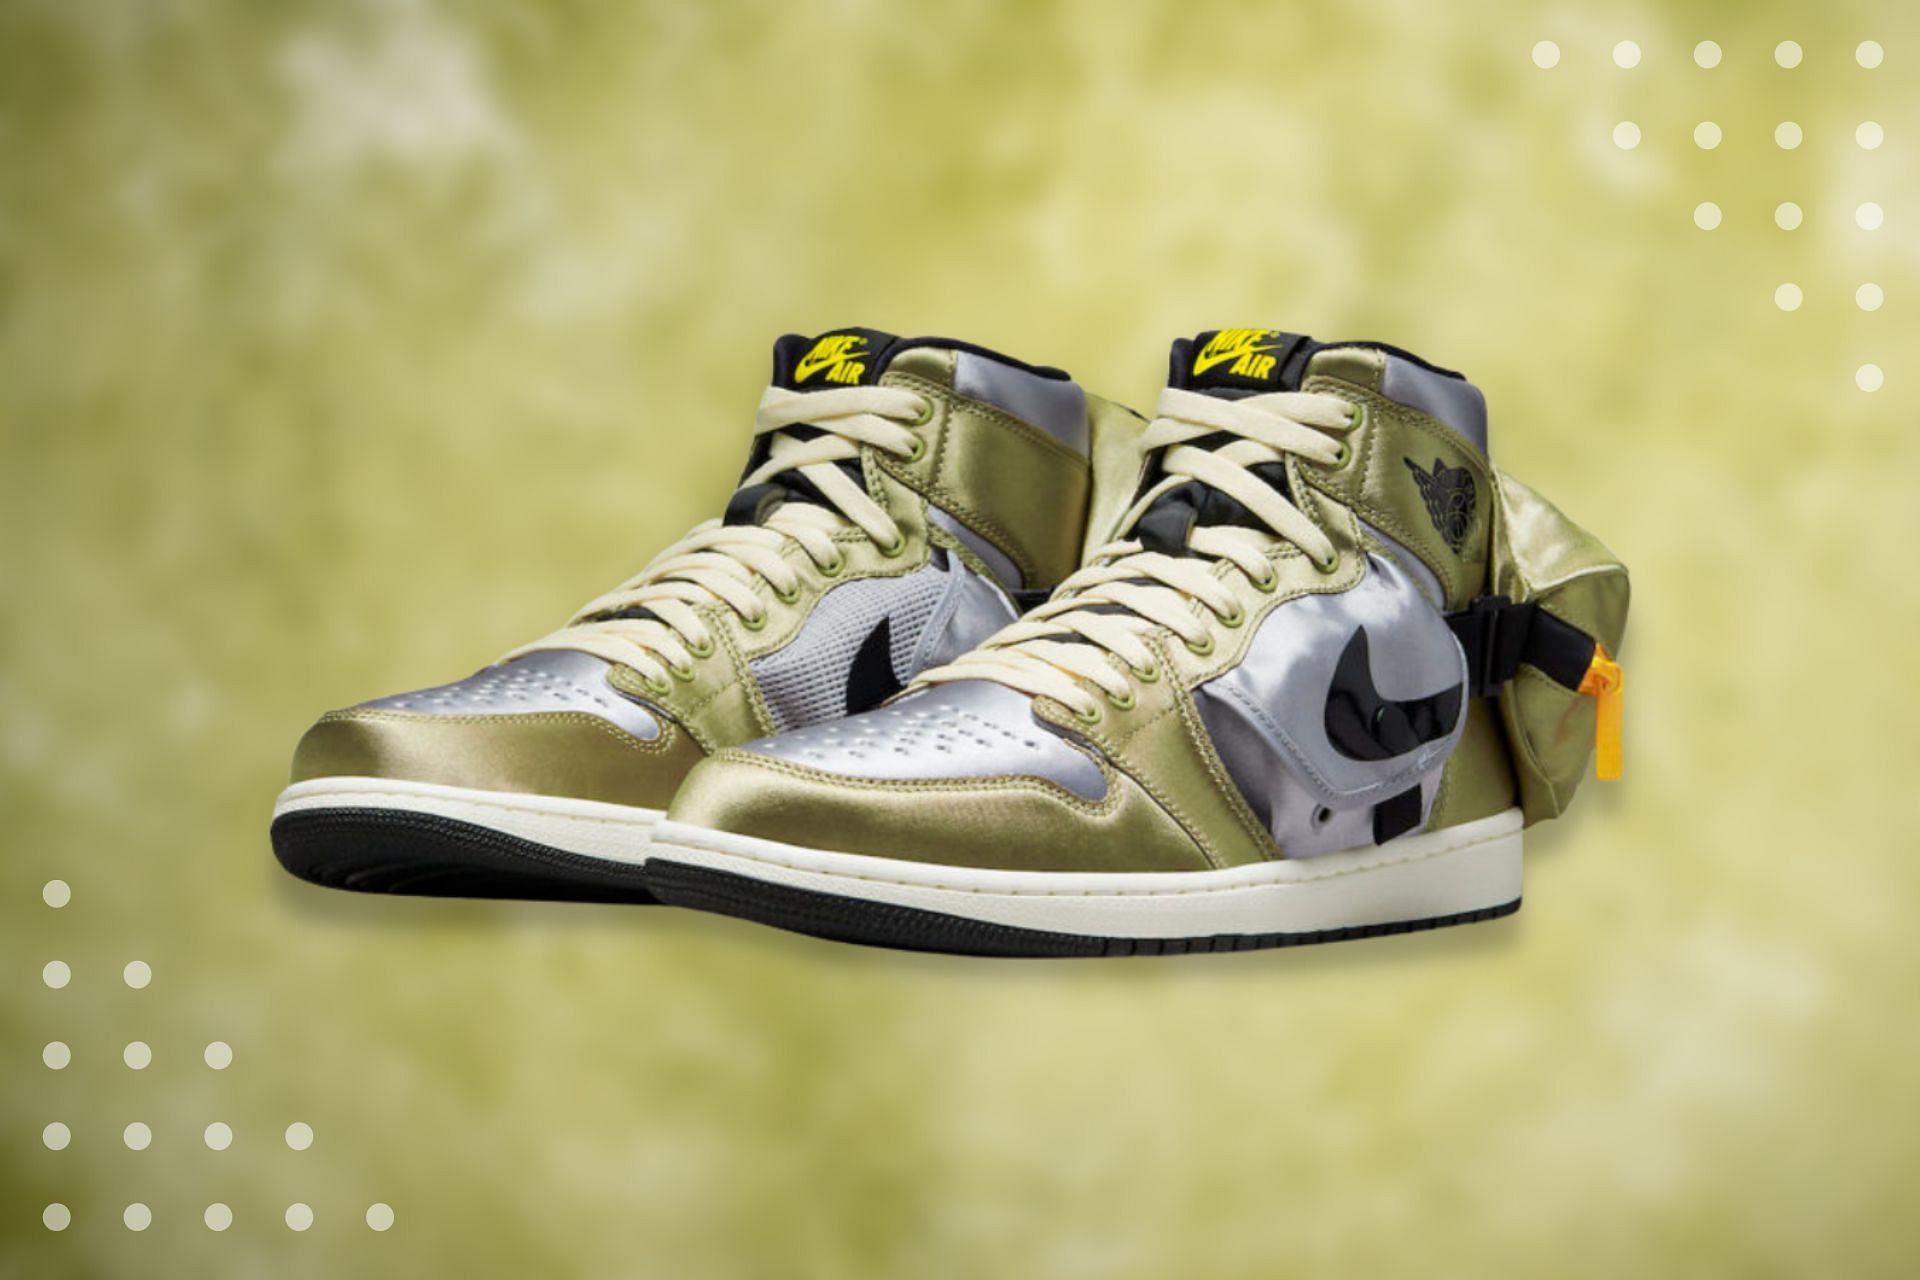 Where to buy Air Jordan 1 High Utility Neutral Olive colorway